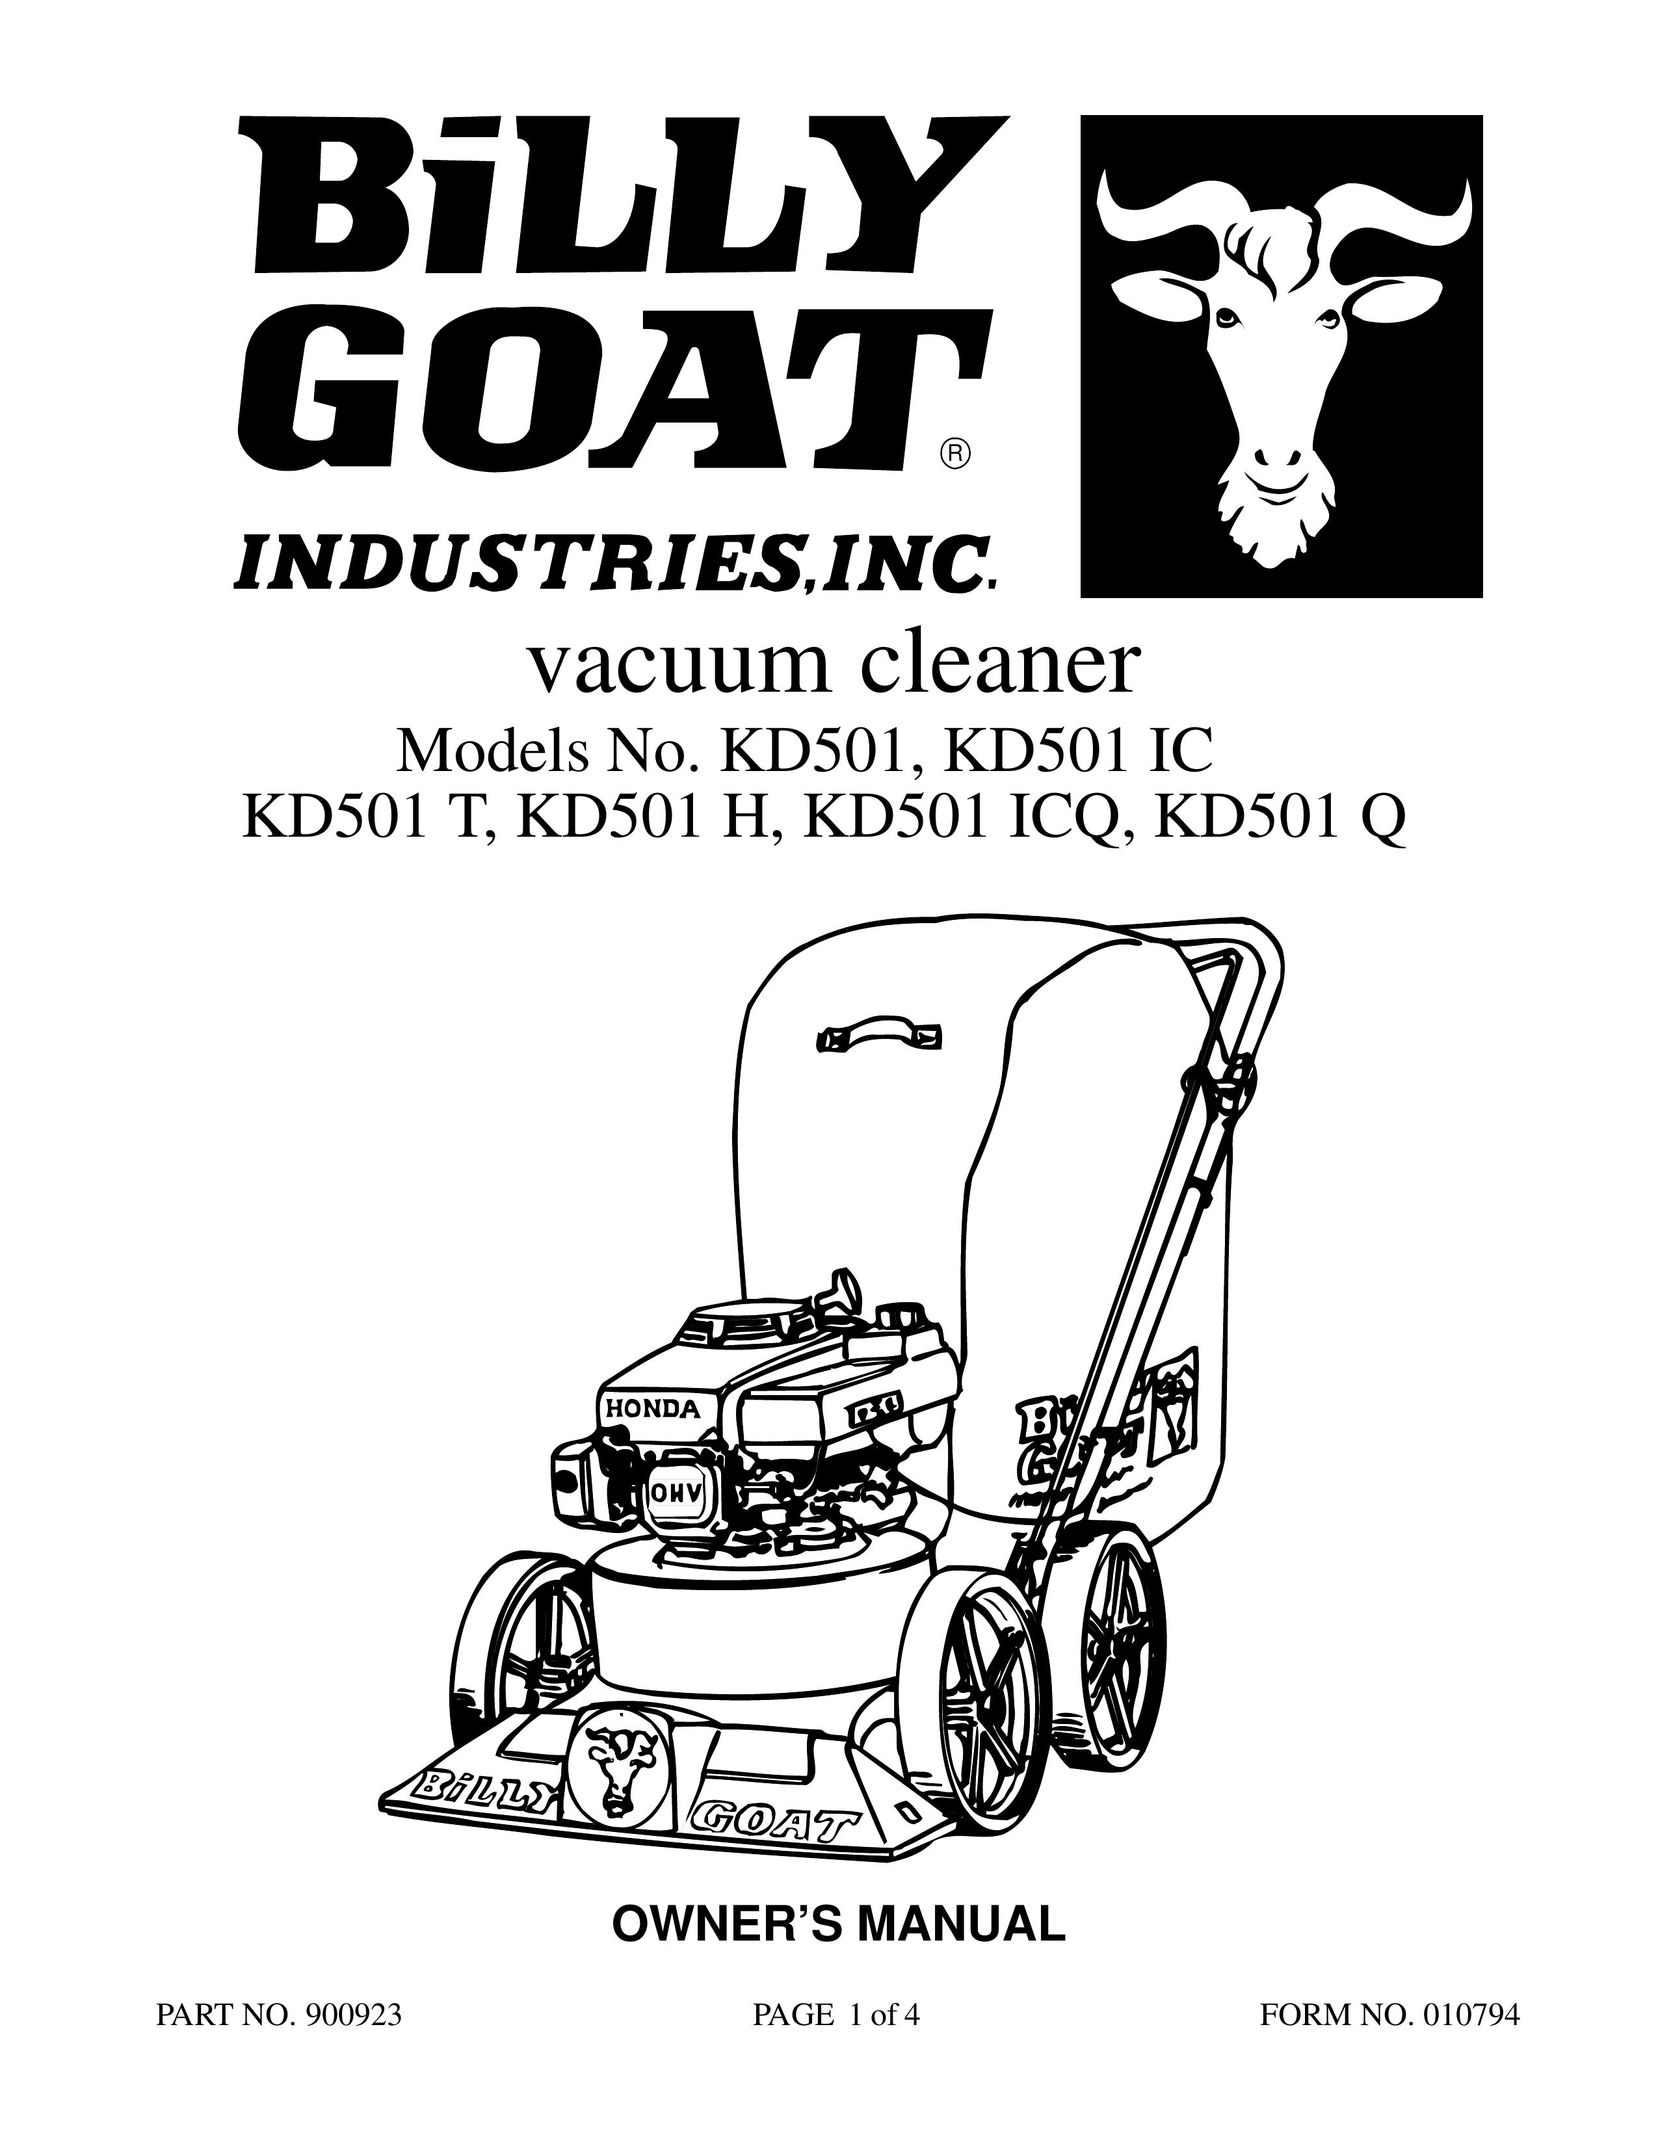 Billy Goat KD501 ICQ Vacuum Cleaner User Manual